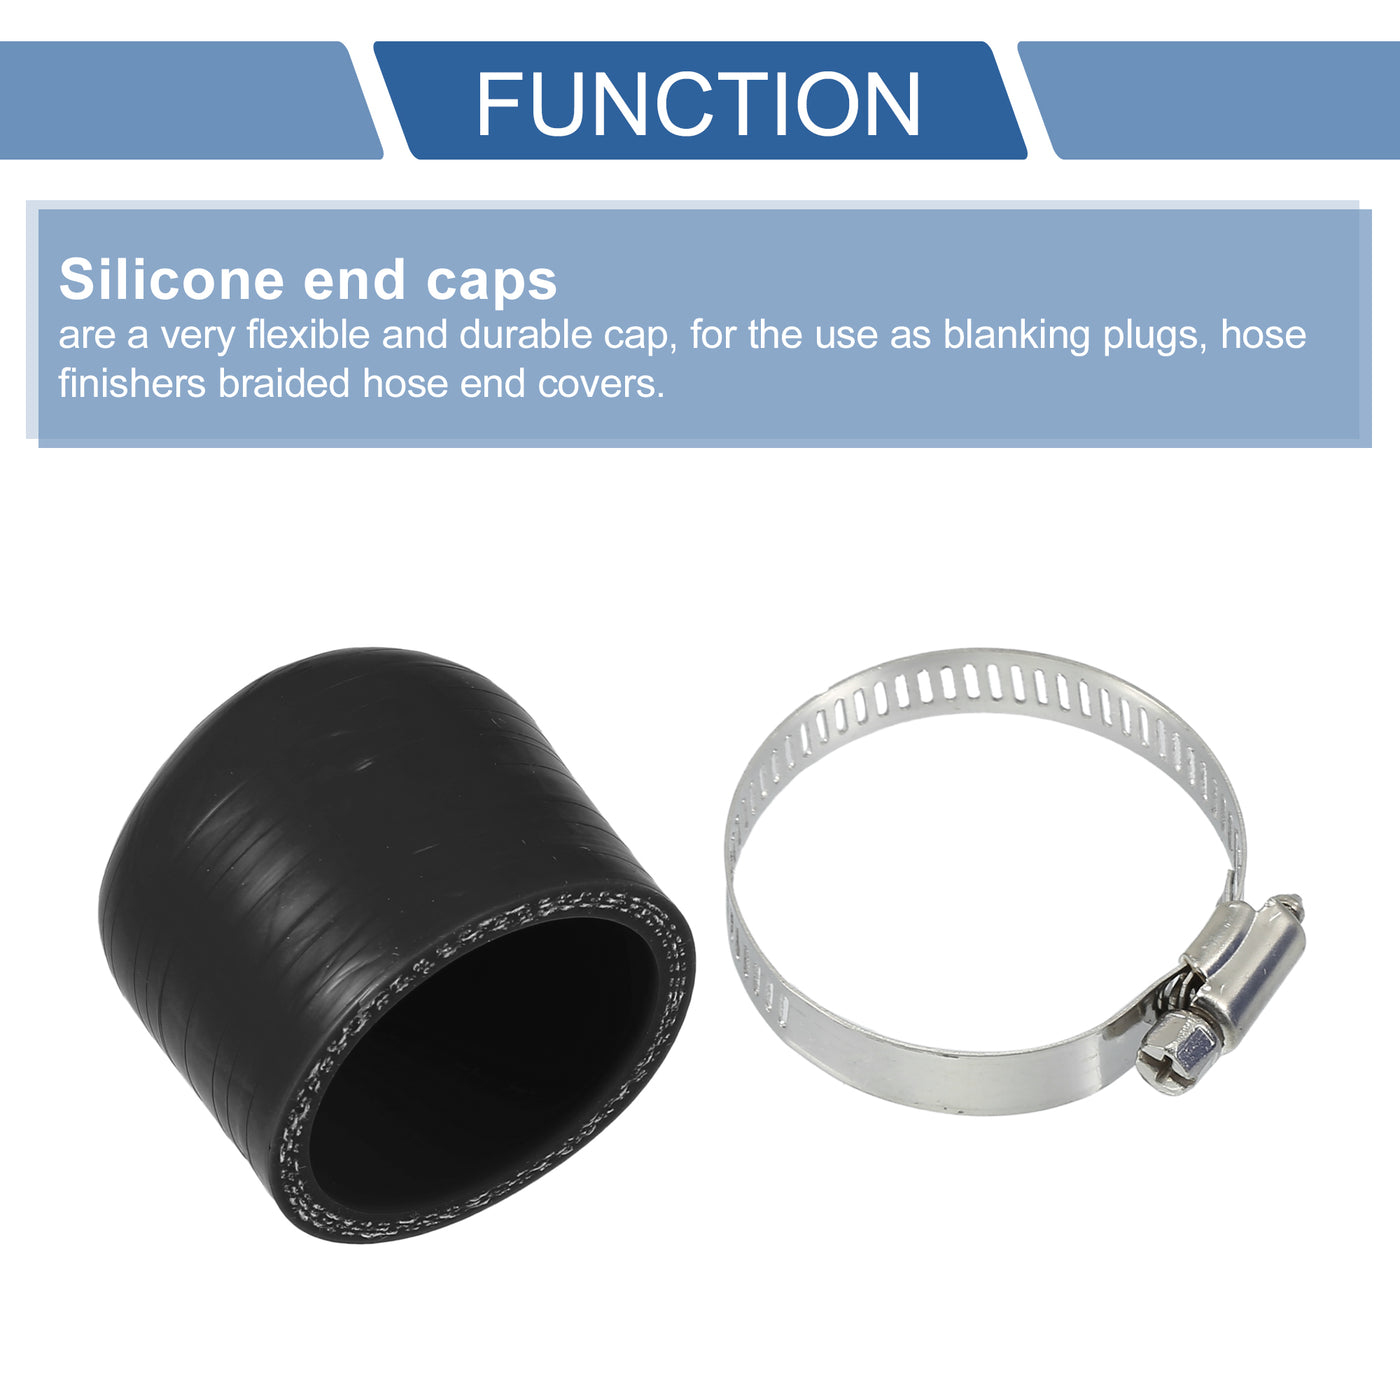 X AUTOHAUX 1 Set 30mm Length 40mm/1.57" ID Black Car Silicone Rubber Hose End Cap with Clamps Silicone Reinforced Blanking Cap for Bypass Tube Universal